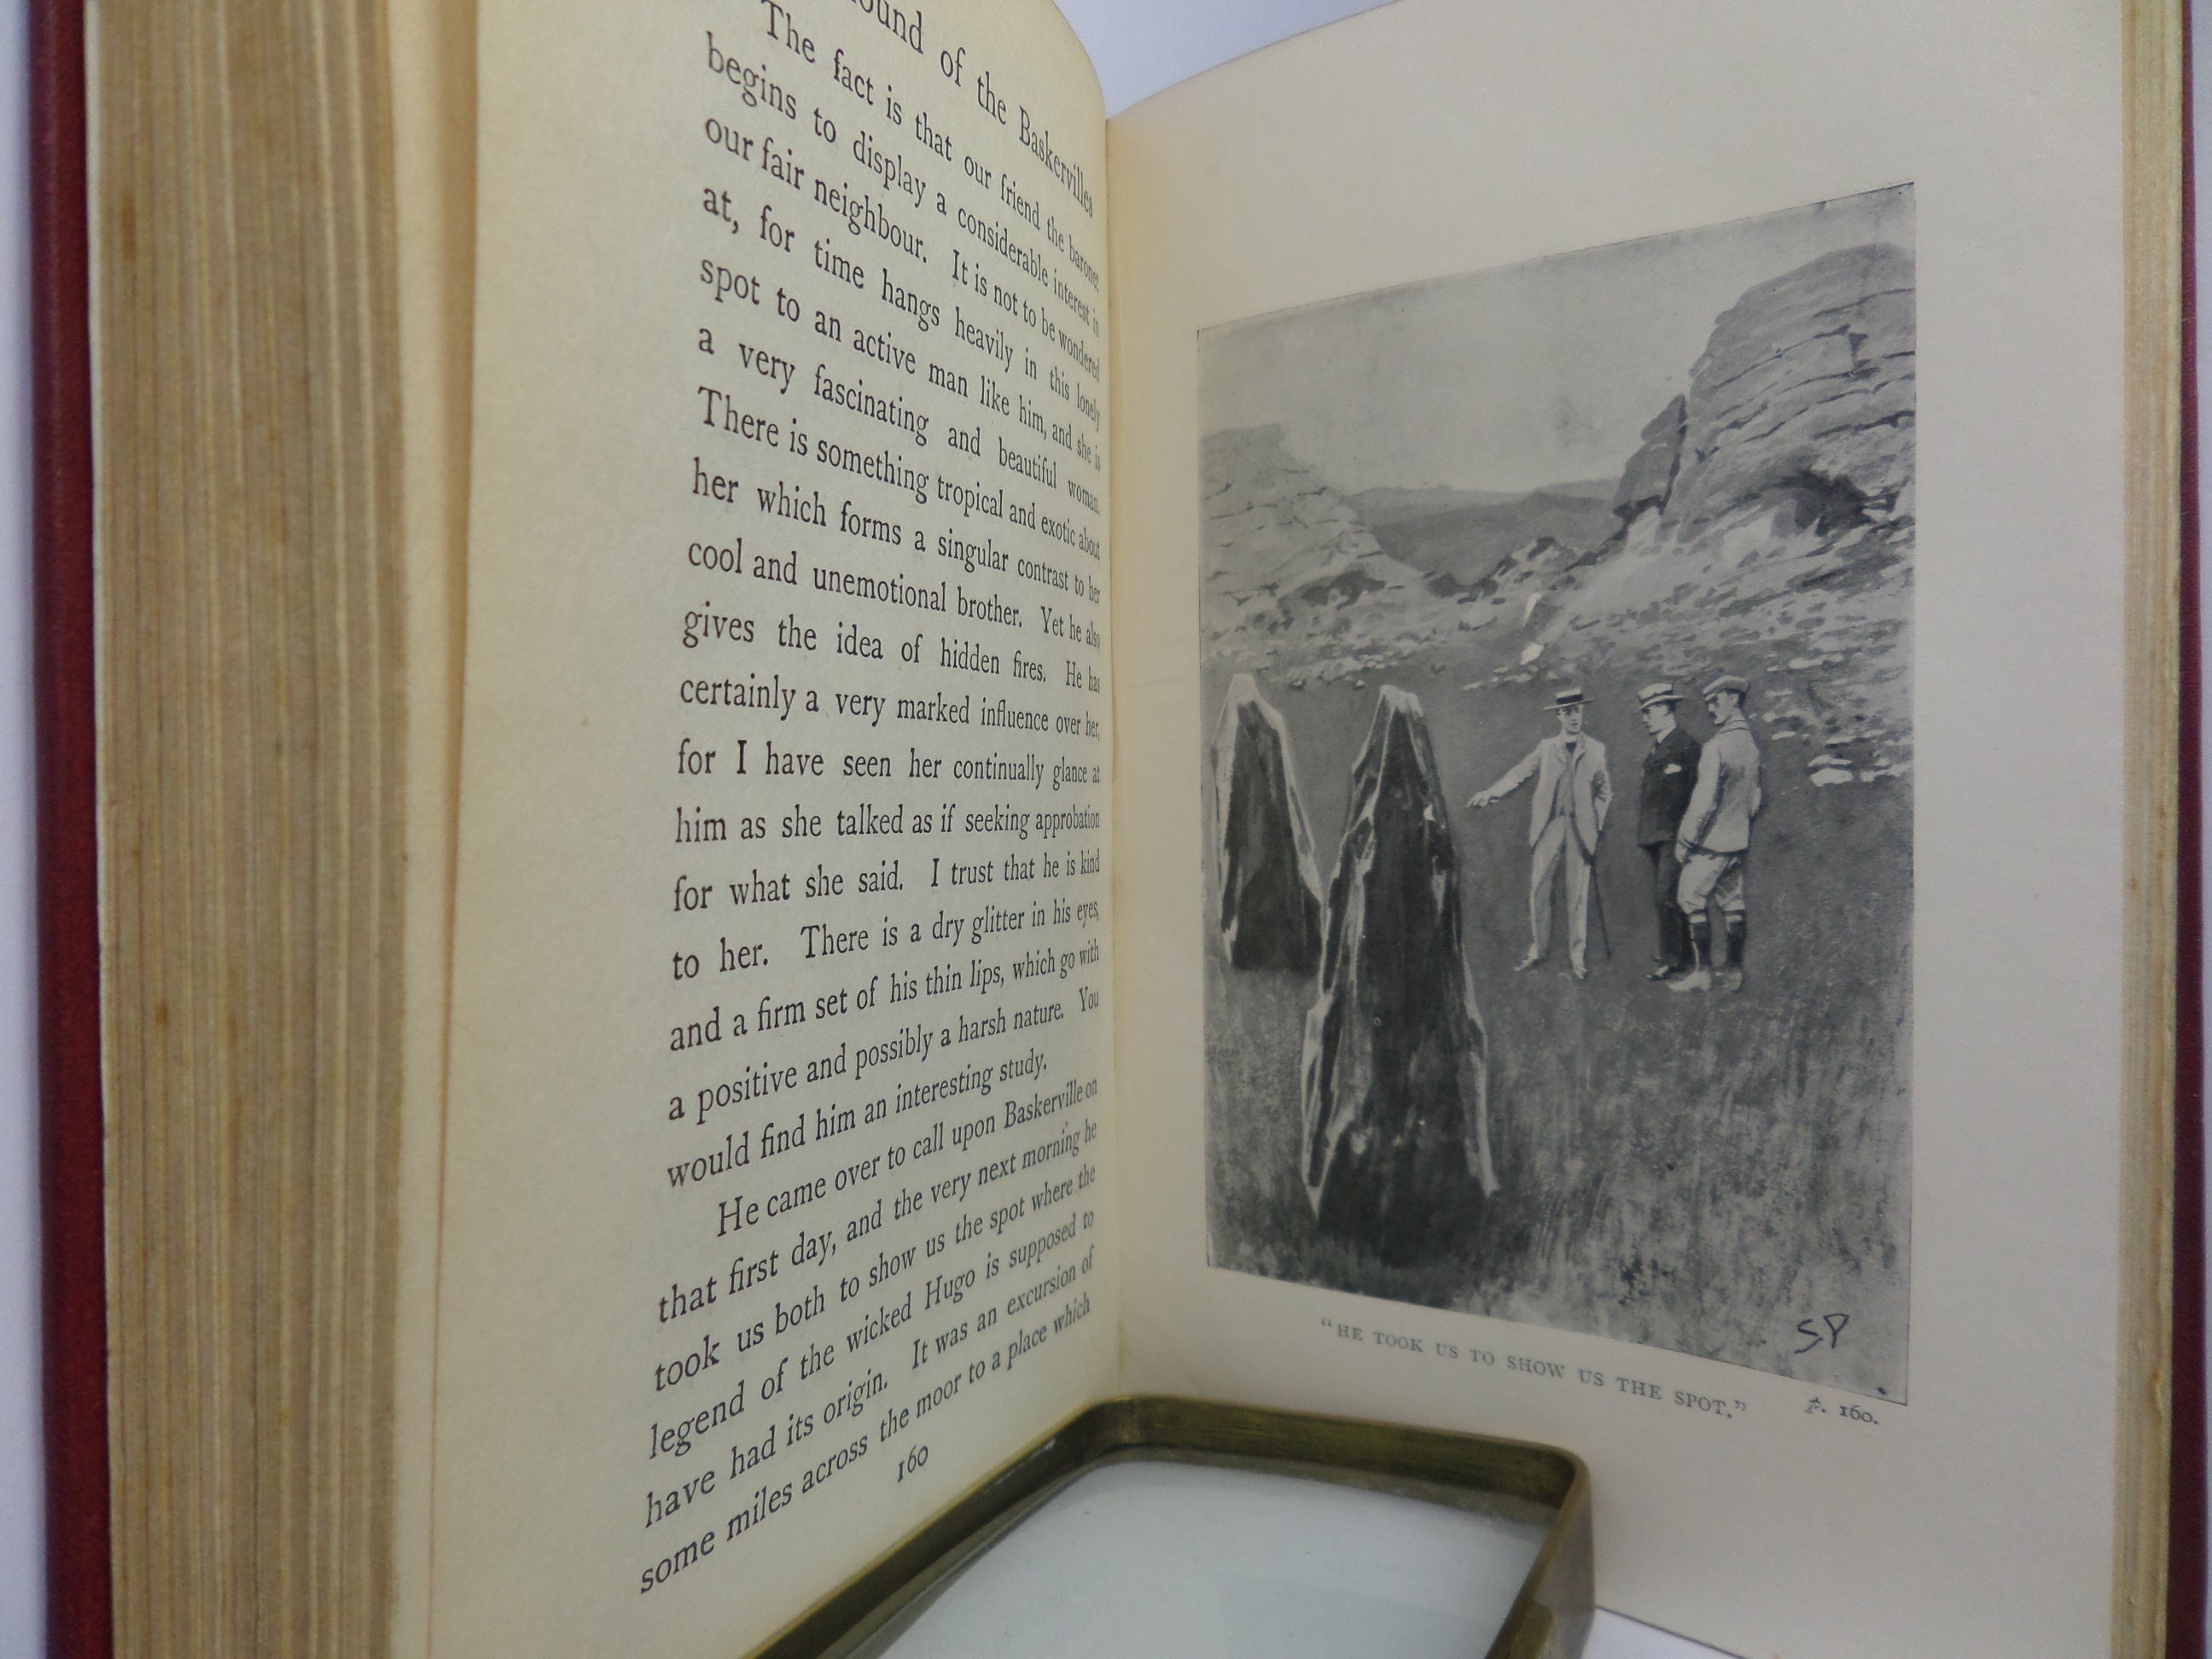 THE HOUND OF THE BASKERVILLES 1902 FIRST EDITION BY ARTHUR CONAN DOYLE